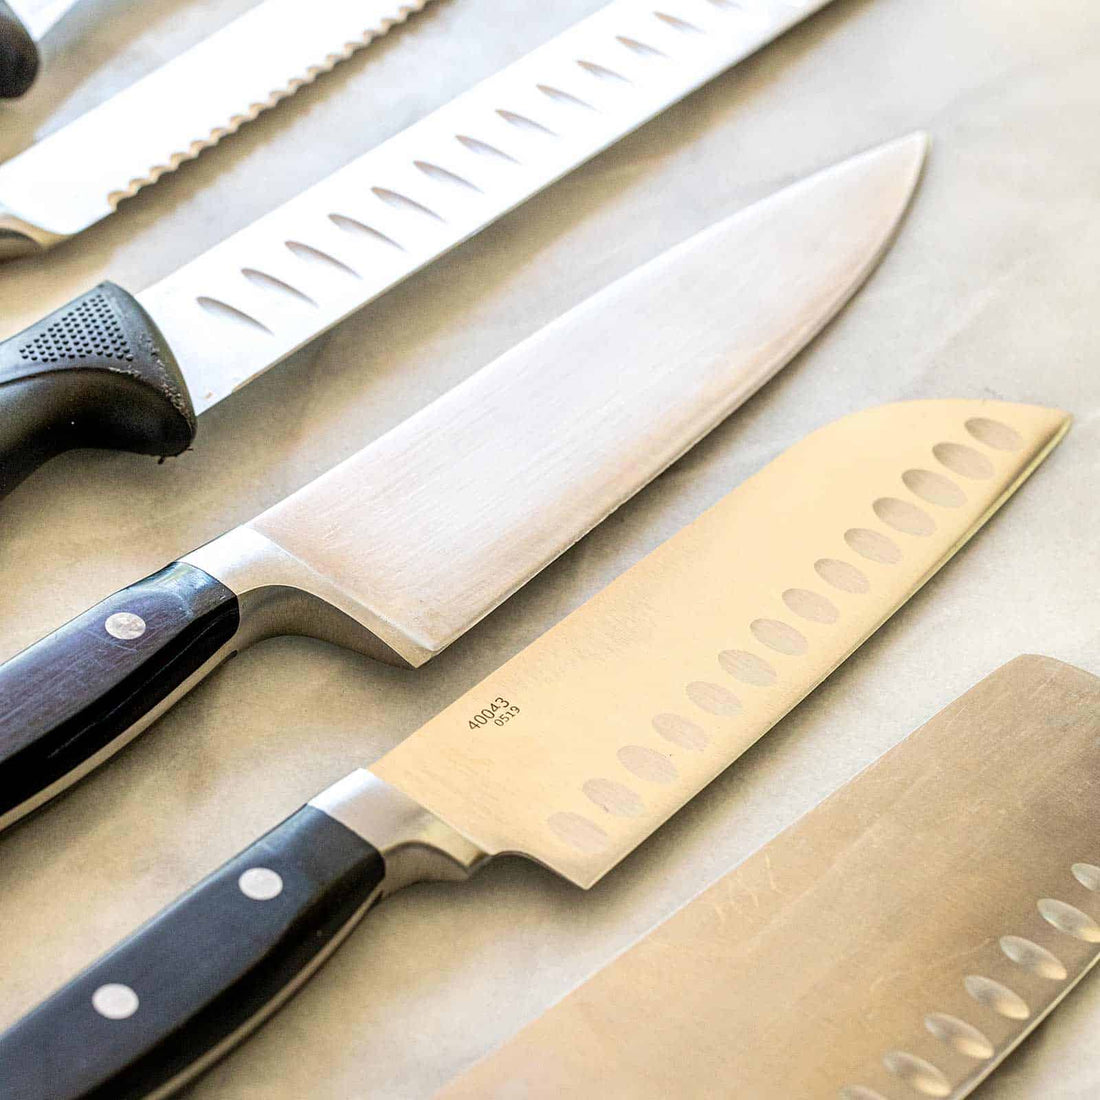 How Important are Knives with Stainless Steel Material in Your Kitchen?